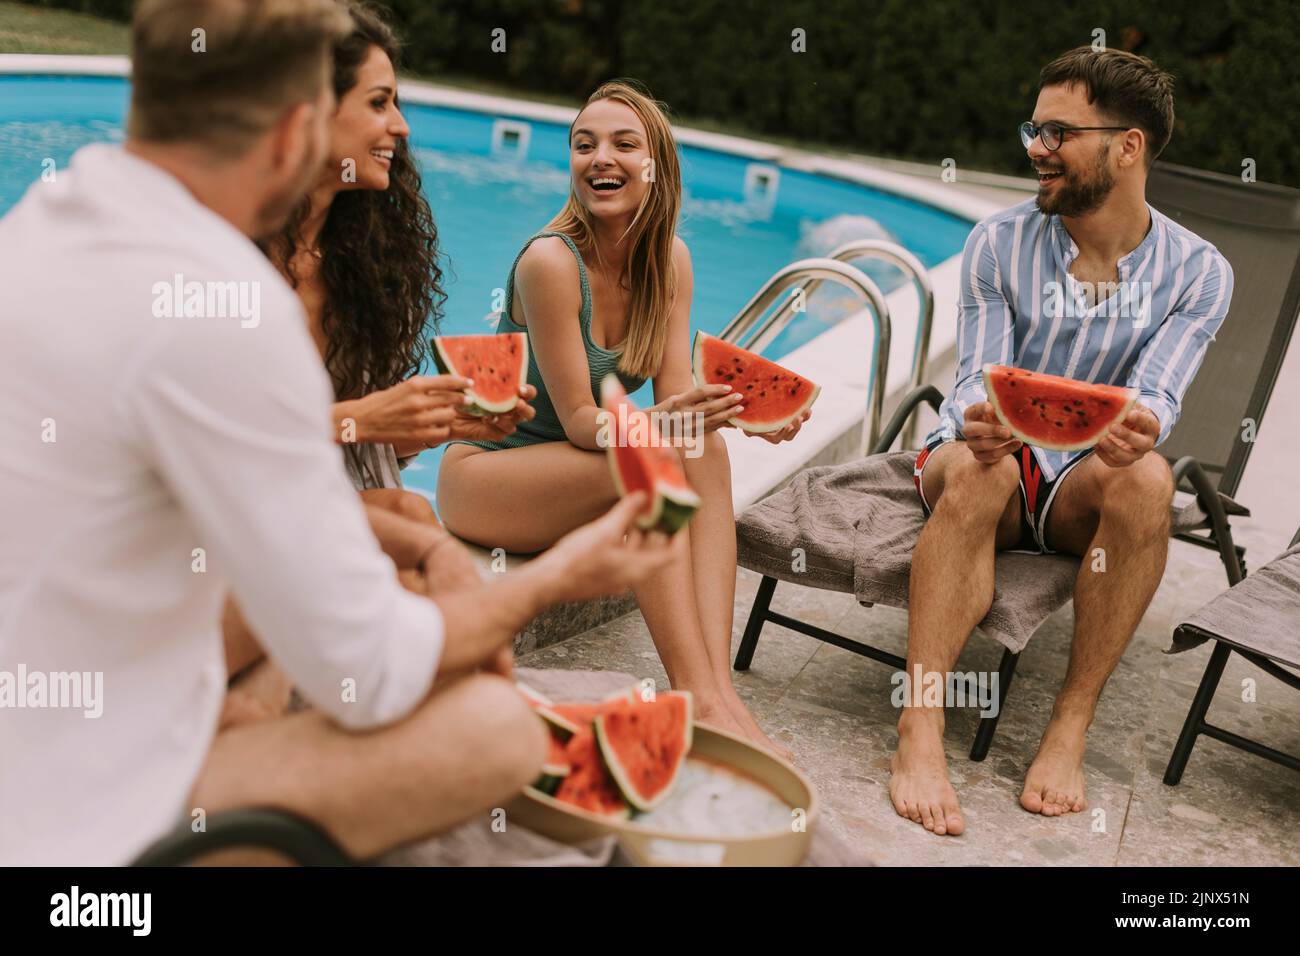 Group of young people sitting by the swimming pool and eating watermelon in the house backyard Stock Photo